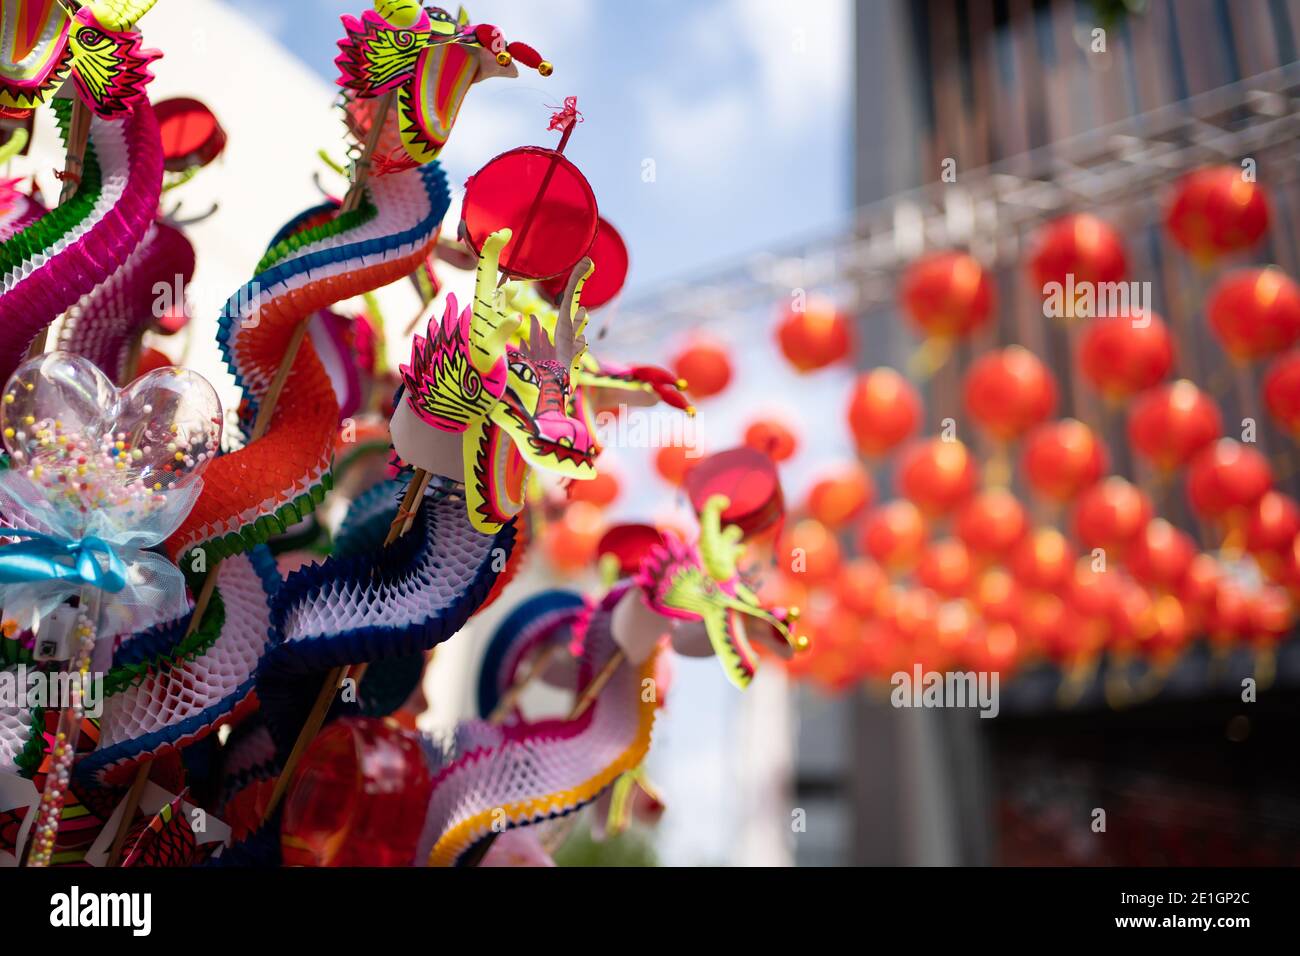 Chinese dragon puppet made from paper in Lunar new Year festival Stock Photo